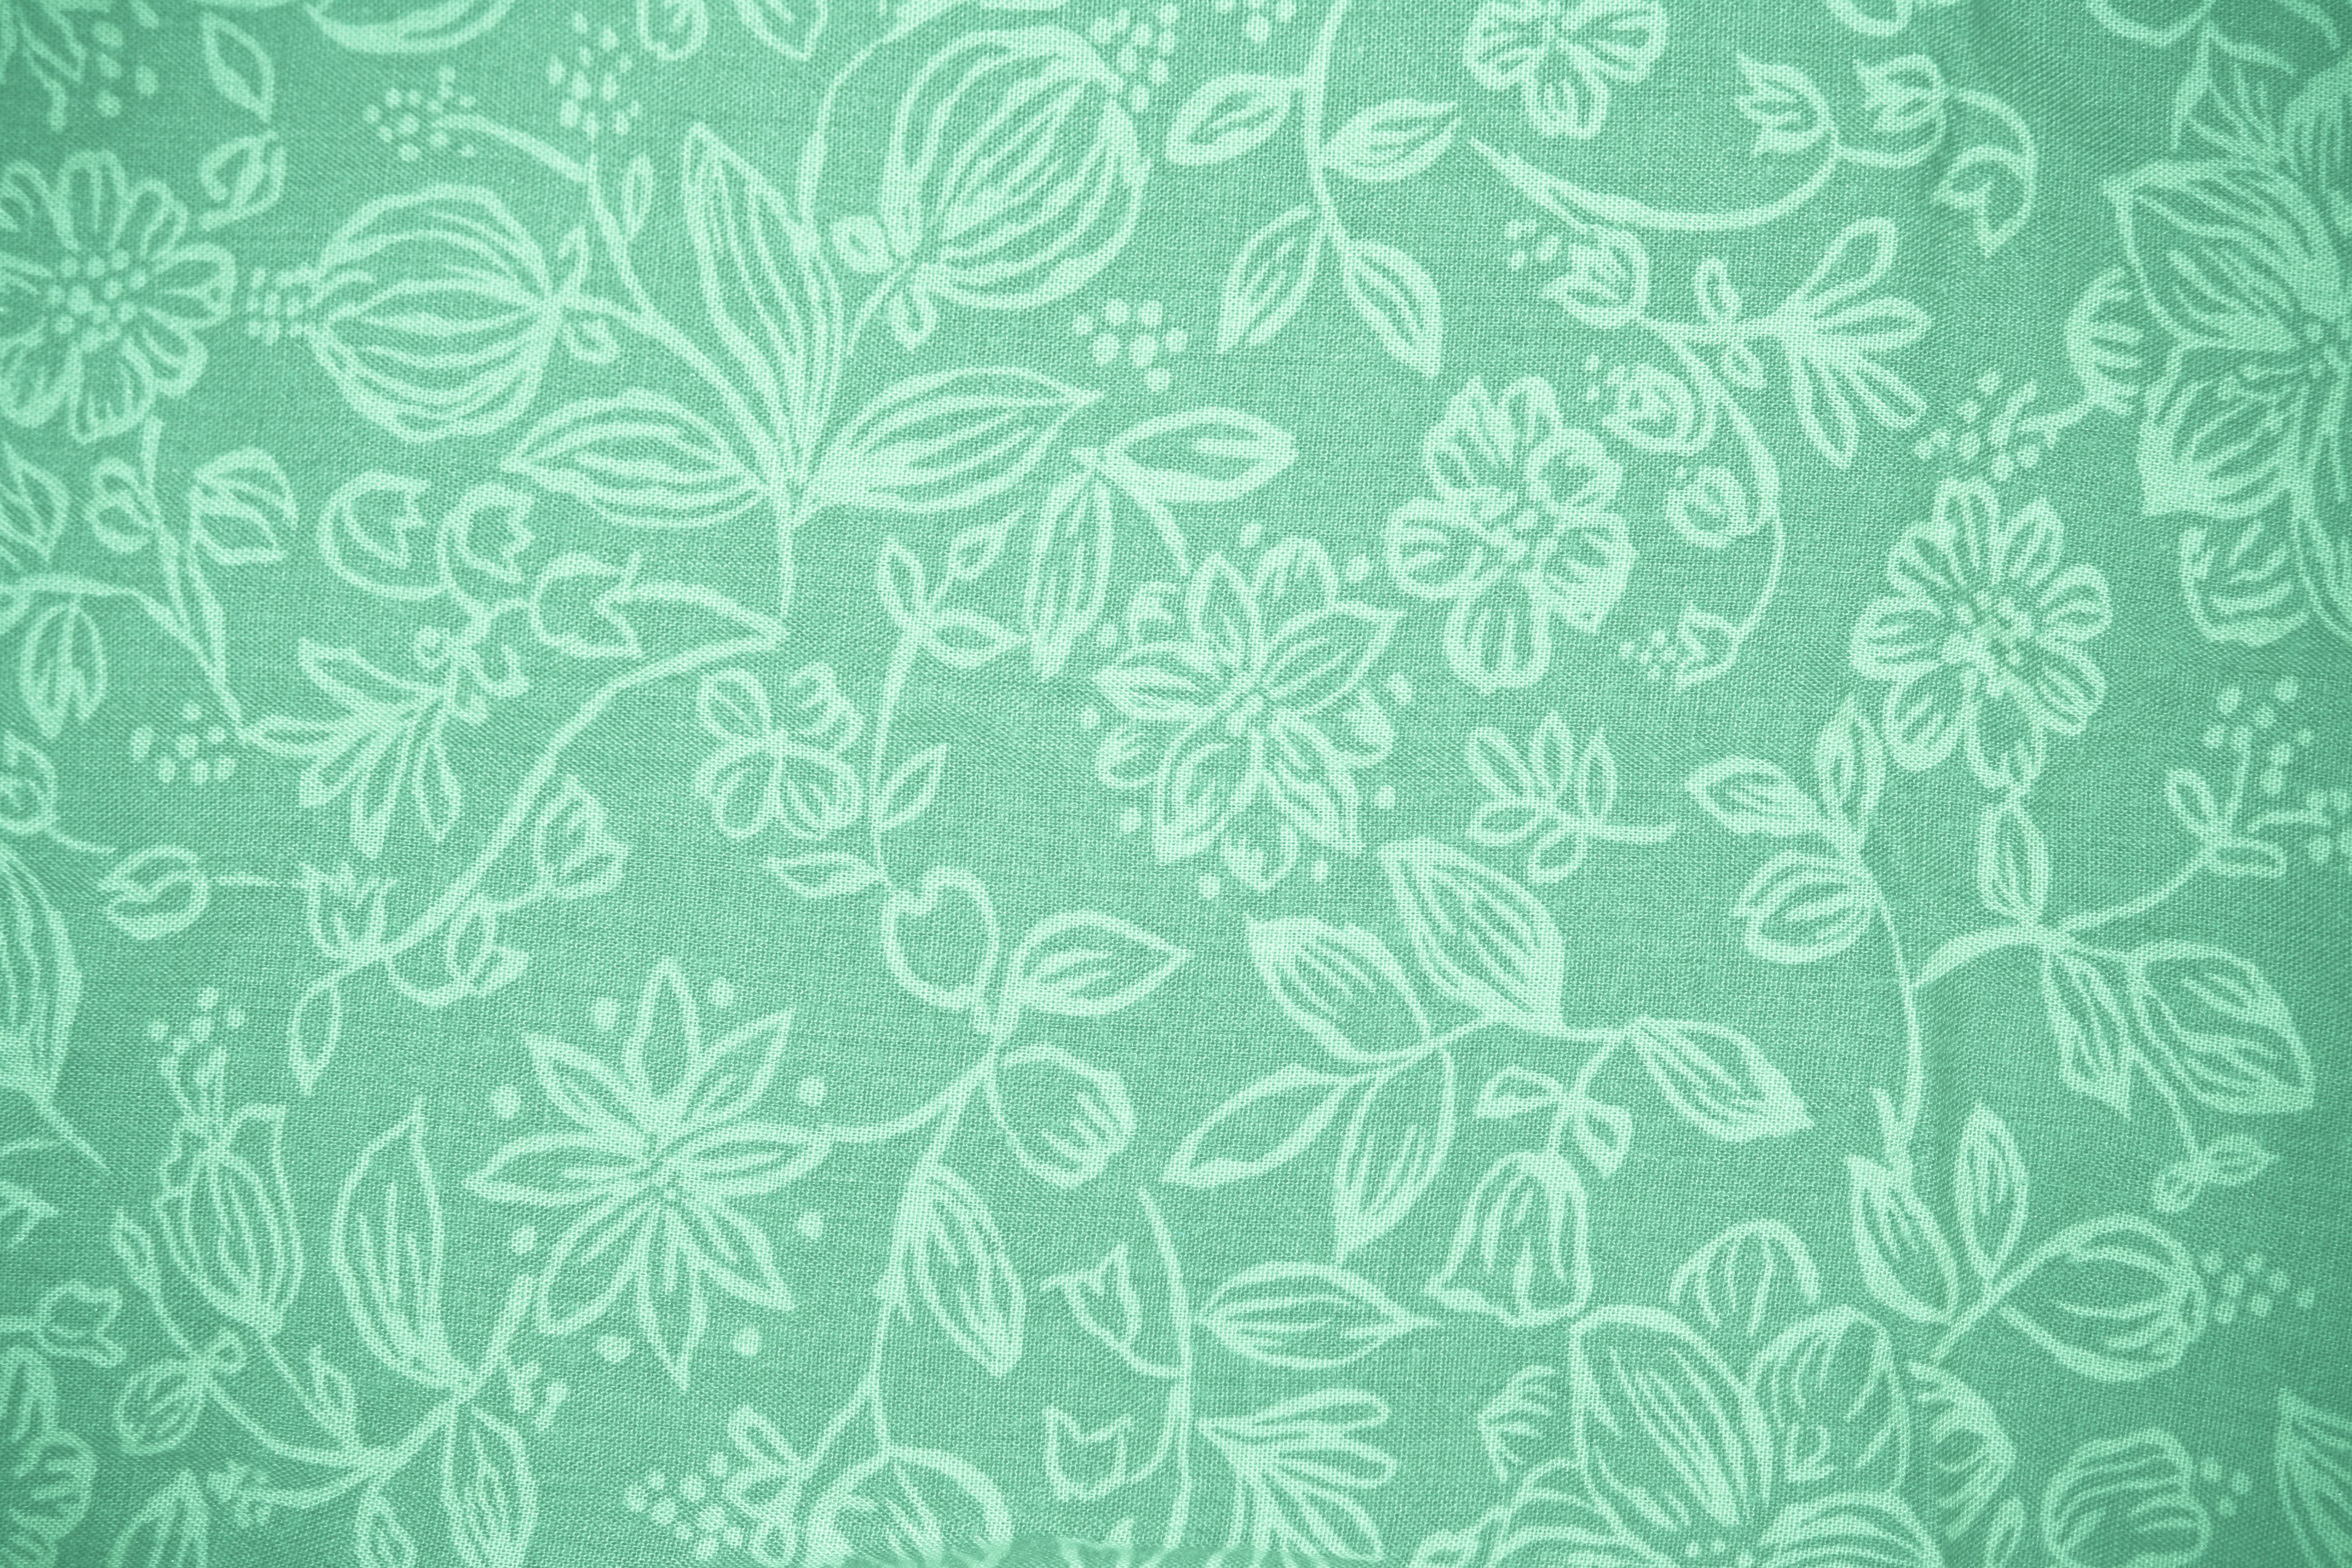 Mint Green Fabric With Floral Pattern Texture High Resolution